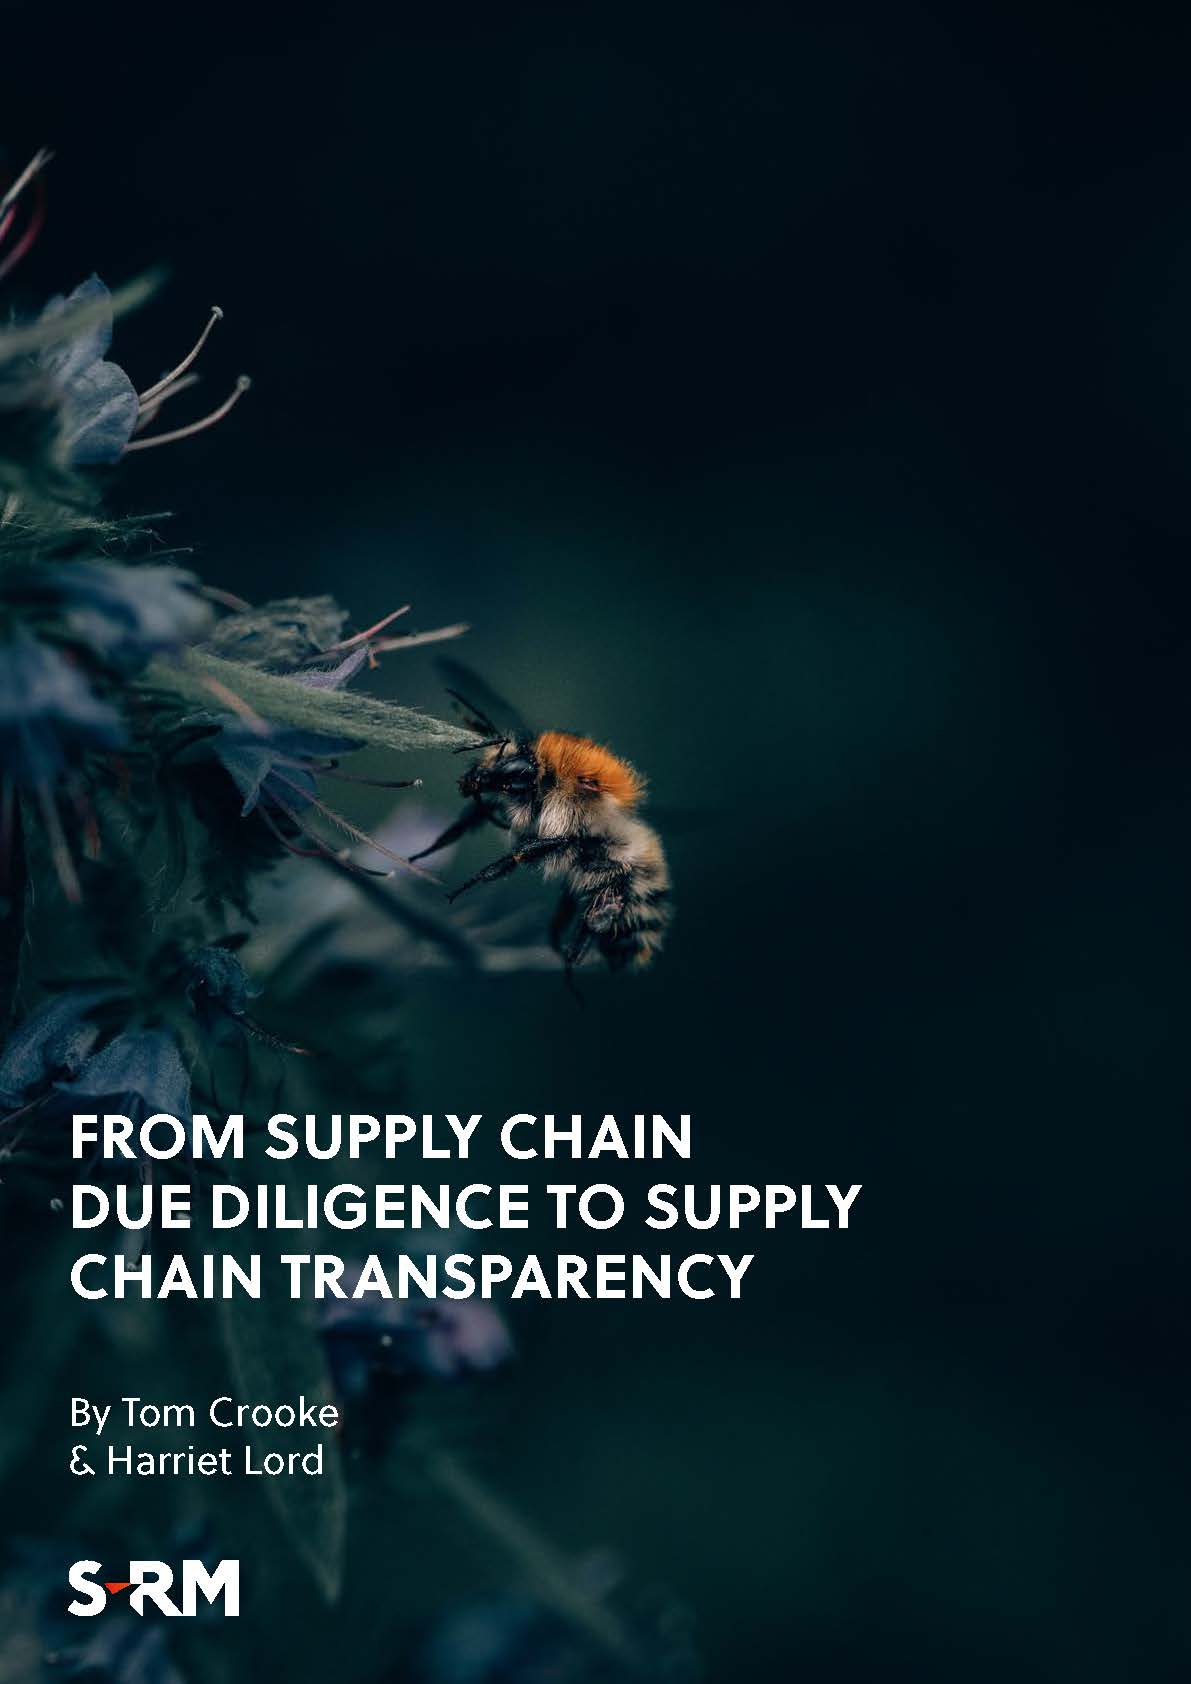 Supply Chain Transparency